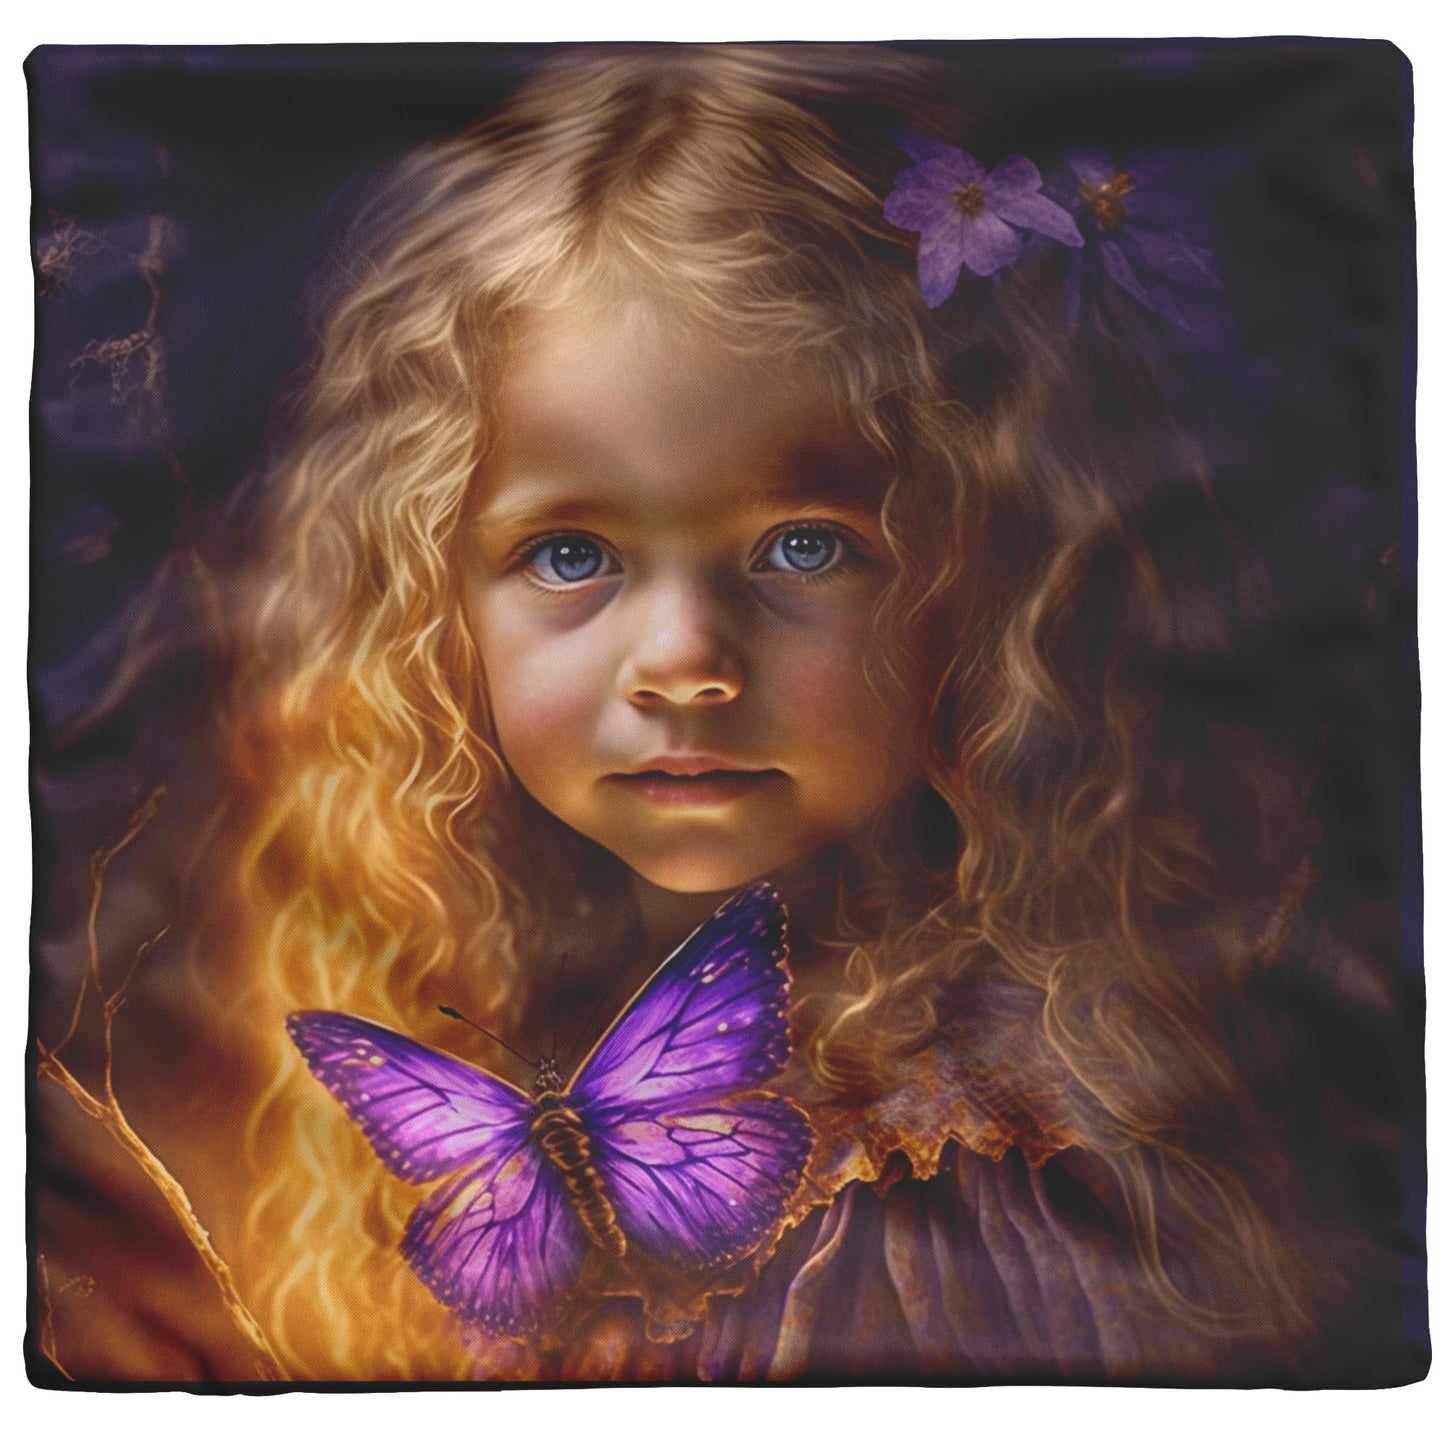 Pillow - Lucy and the Enchanted Forest 3